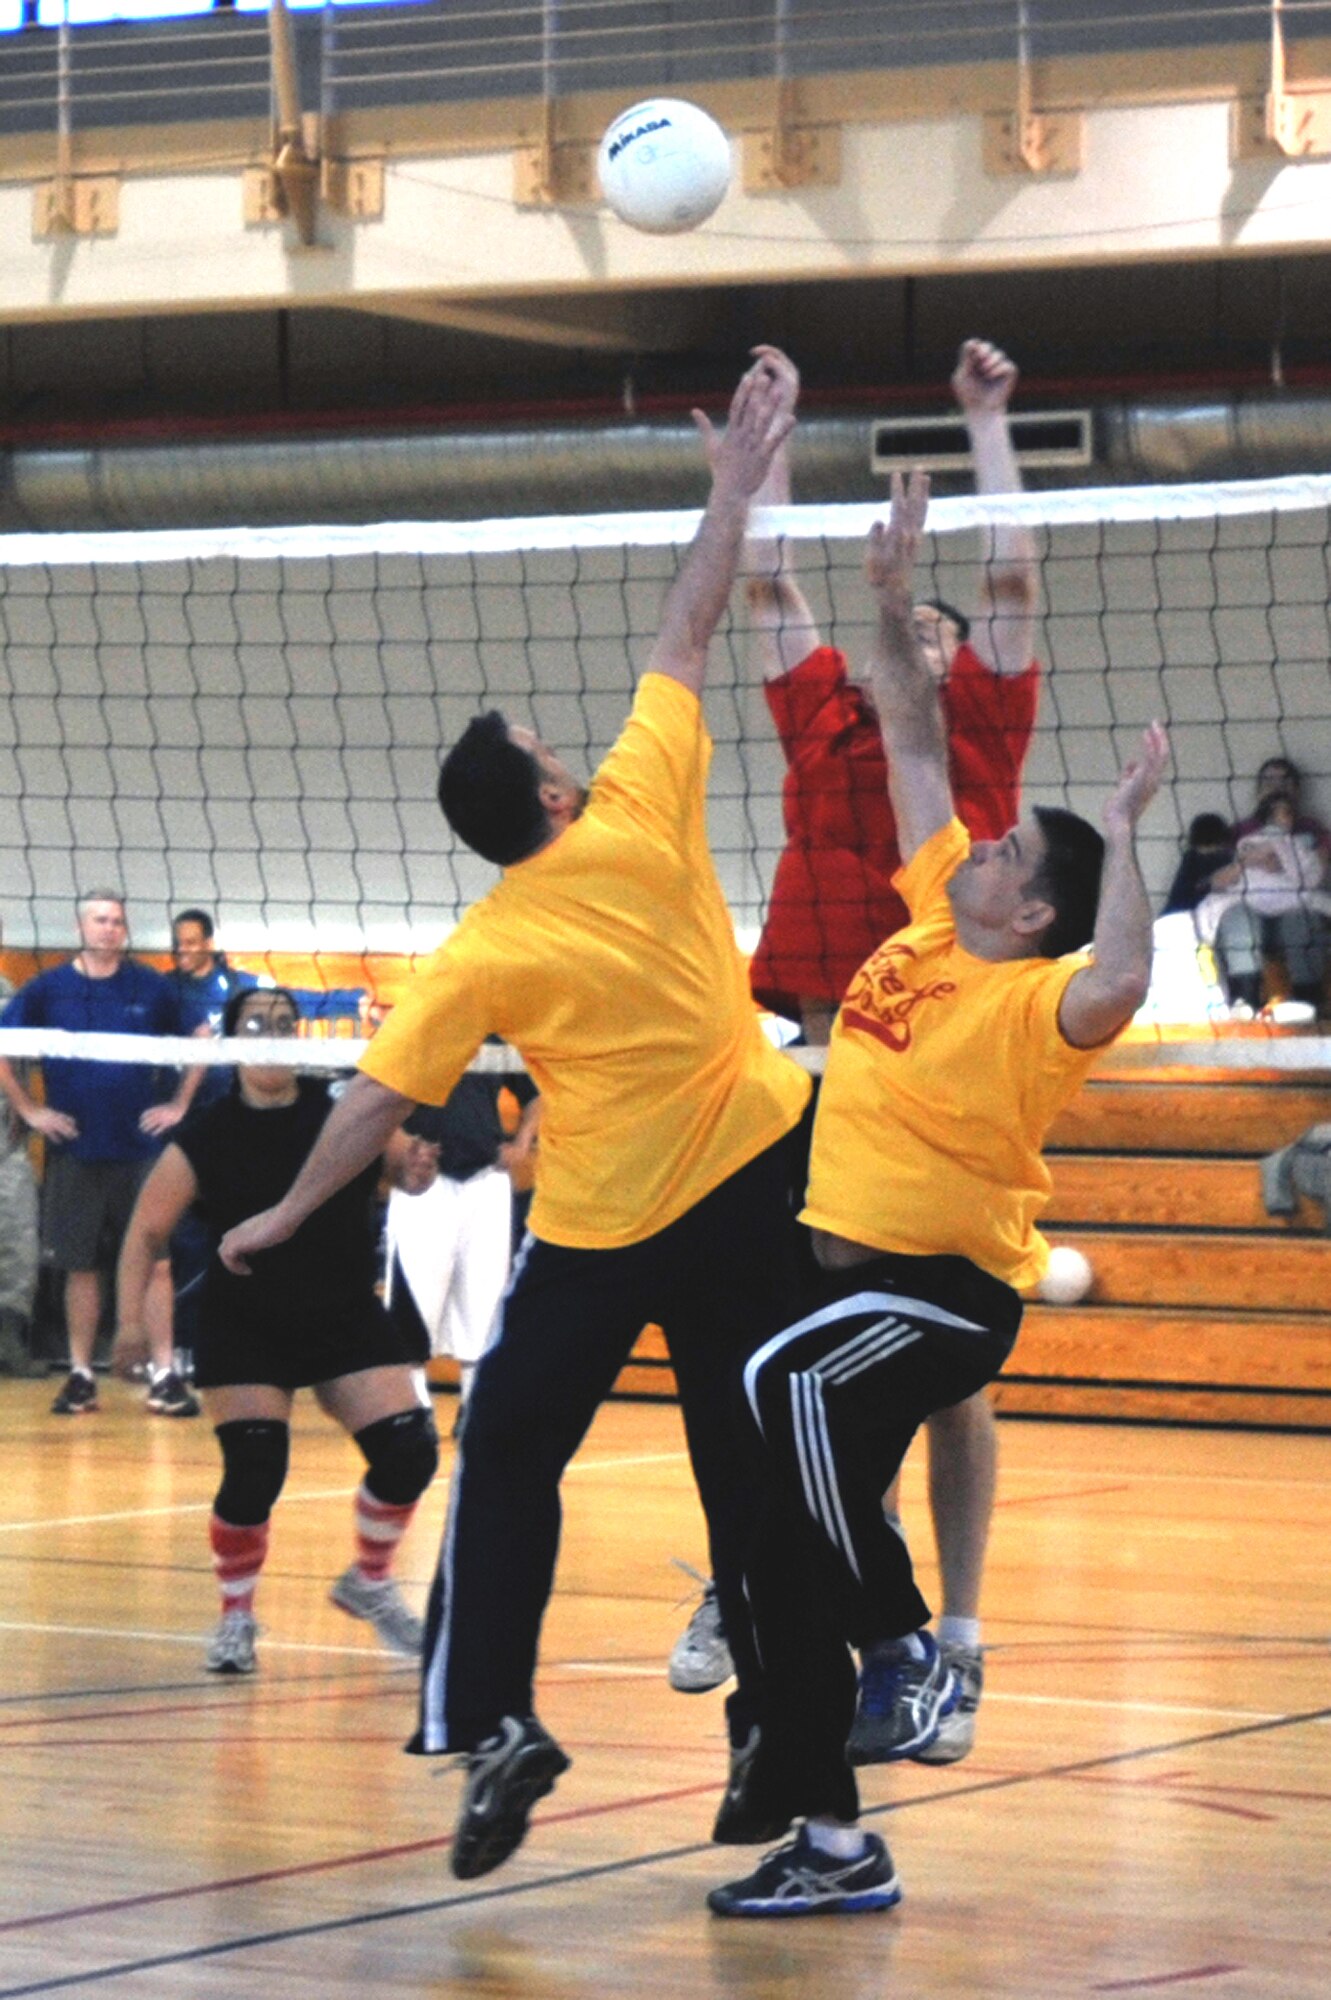 The Chiefs and Top 3 members guard the net in the heated final round of the Battle of the Tiers volleyball tournament at the Osan Fitness Center on Osan Air Base, Republic of Korea, March 29, 2013. The Top 3 took the title in the tournament. (U.S. Air Force photo/Senior Airman Alexis Siekert)